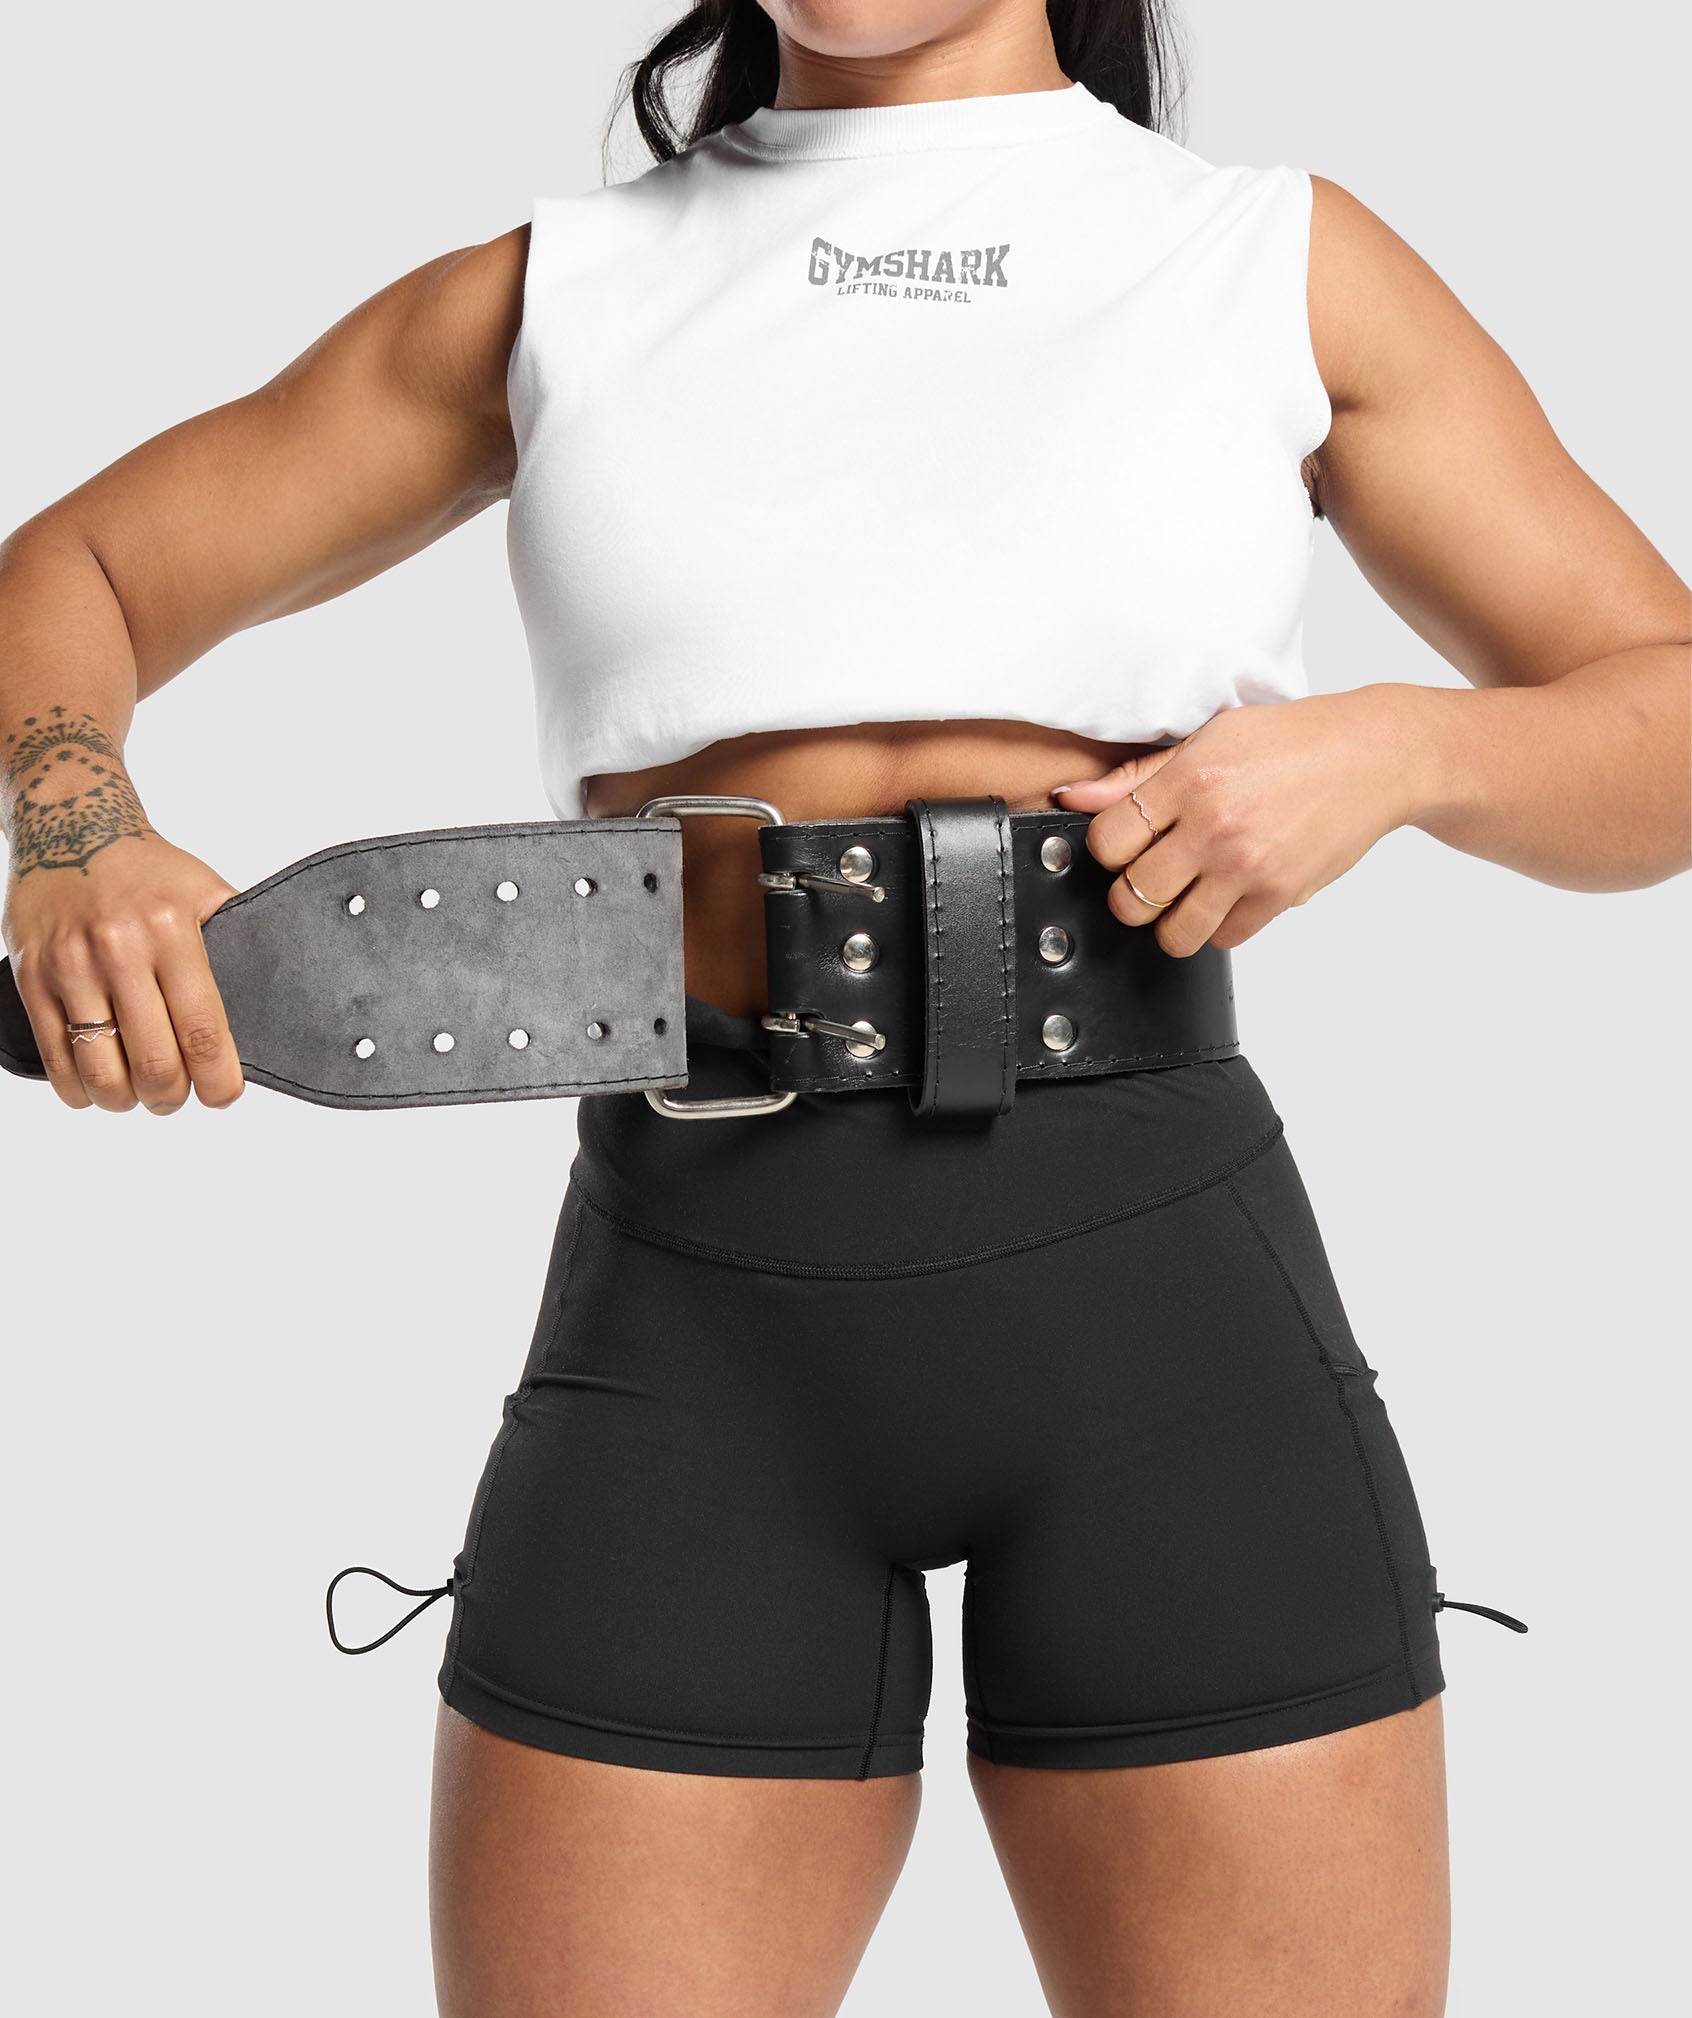 Double Prong Lifting Belt in Black - view 1